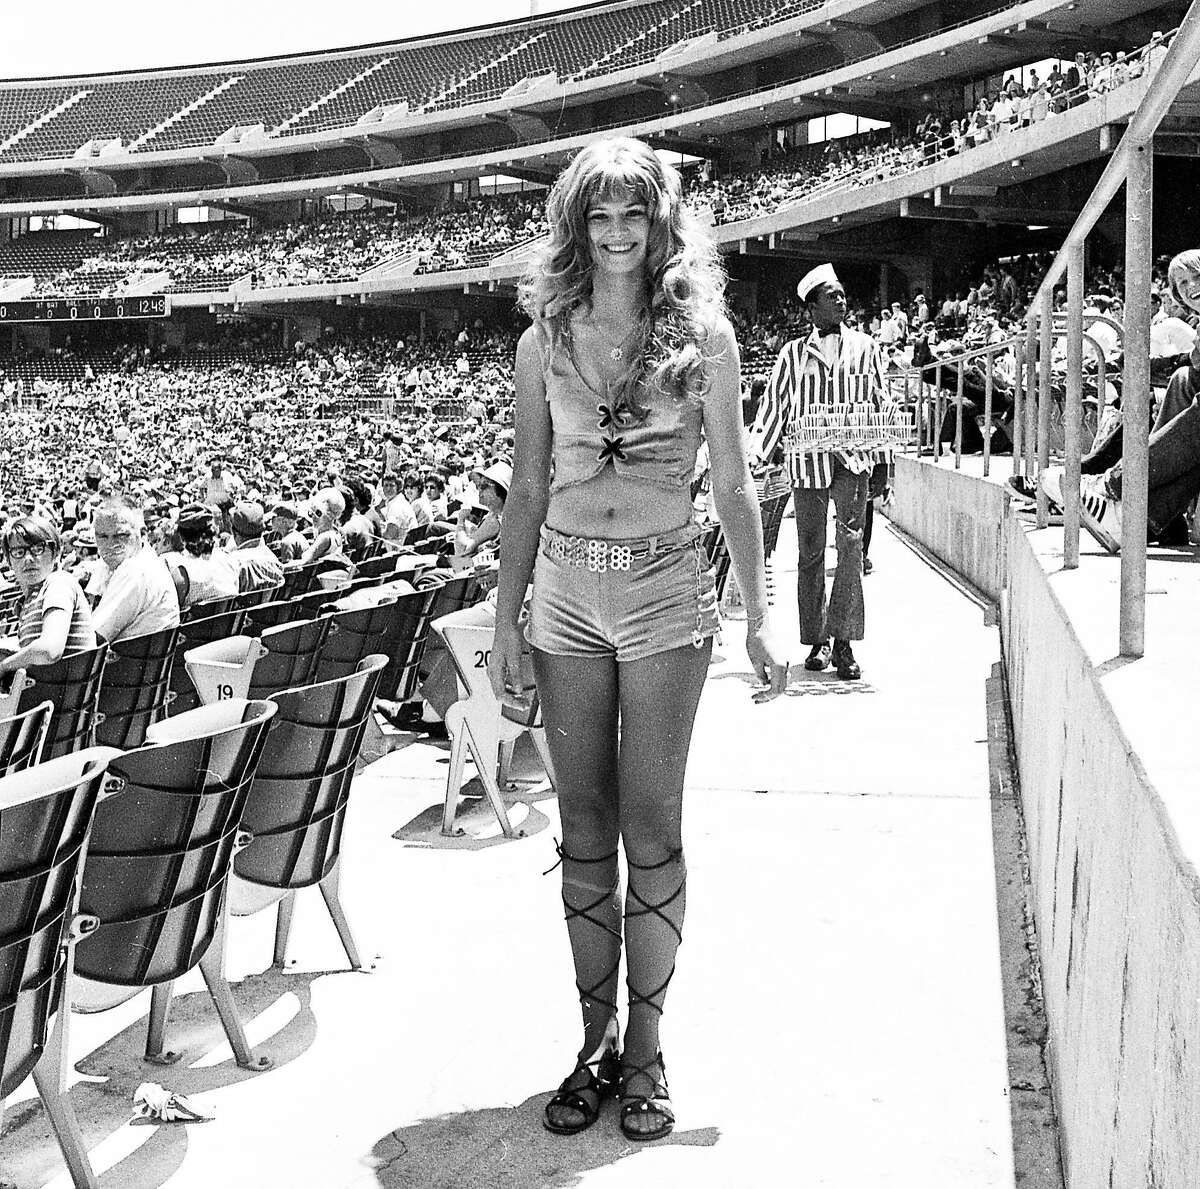 June 27, 1971: A woman walks through Oakland Coliseum during "Hot Pants Day" at the ballpark - a 1971 A's promotion where women in short tight shorts were given free tickets.